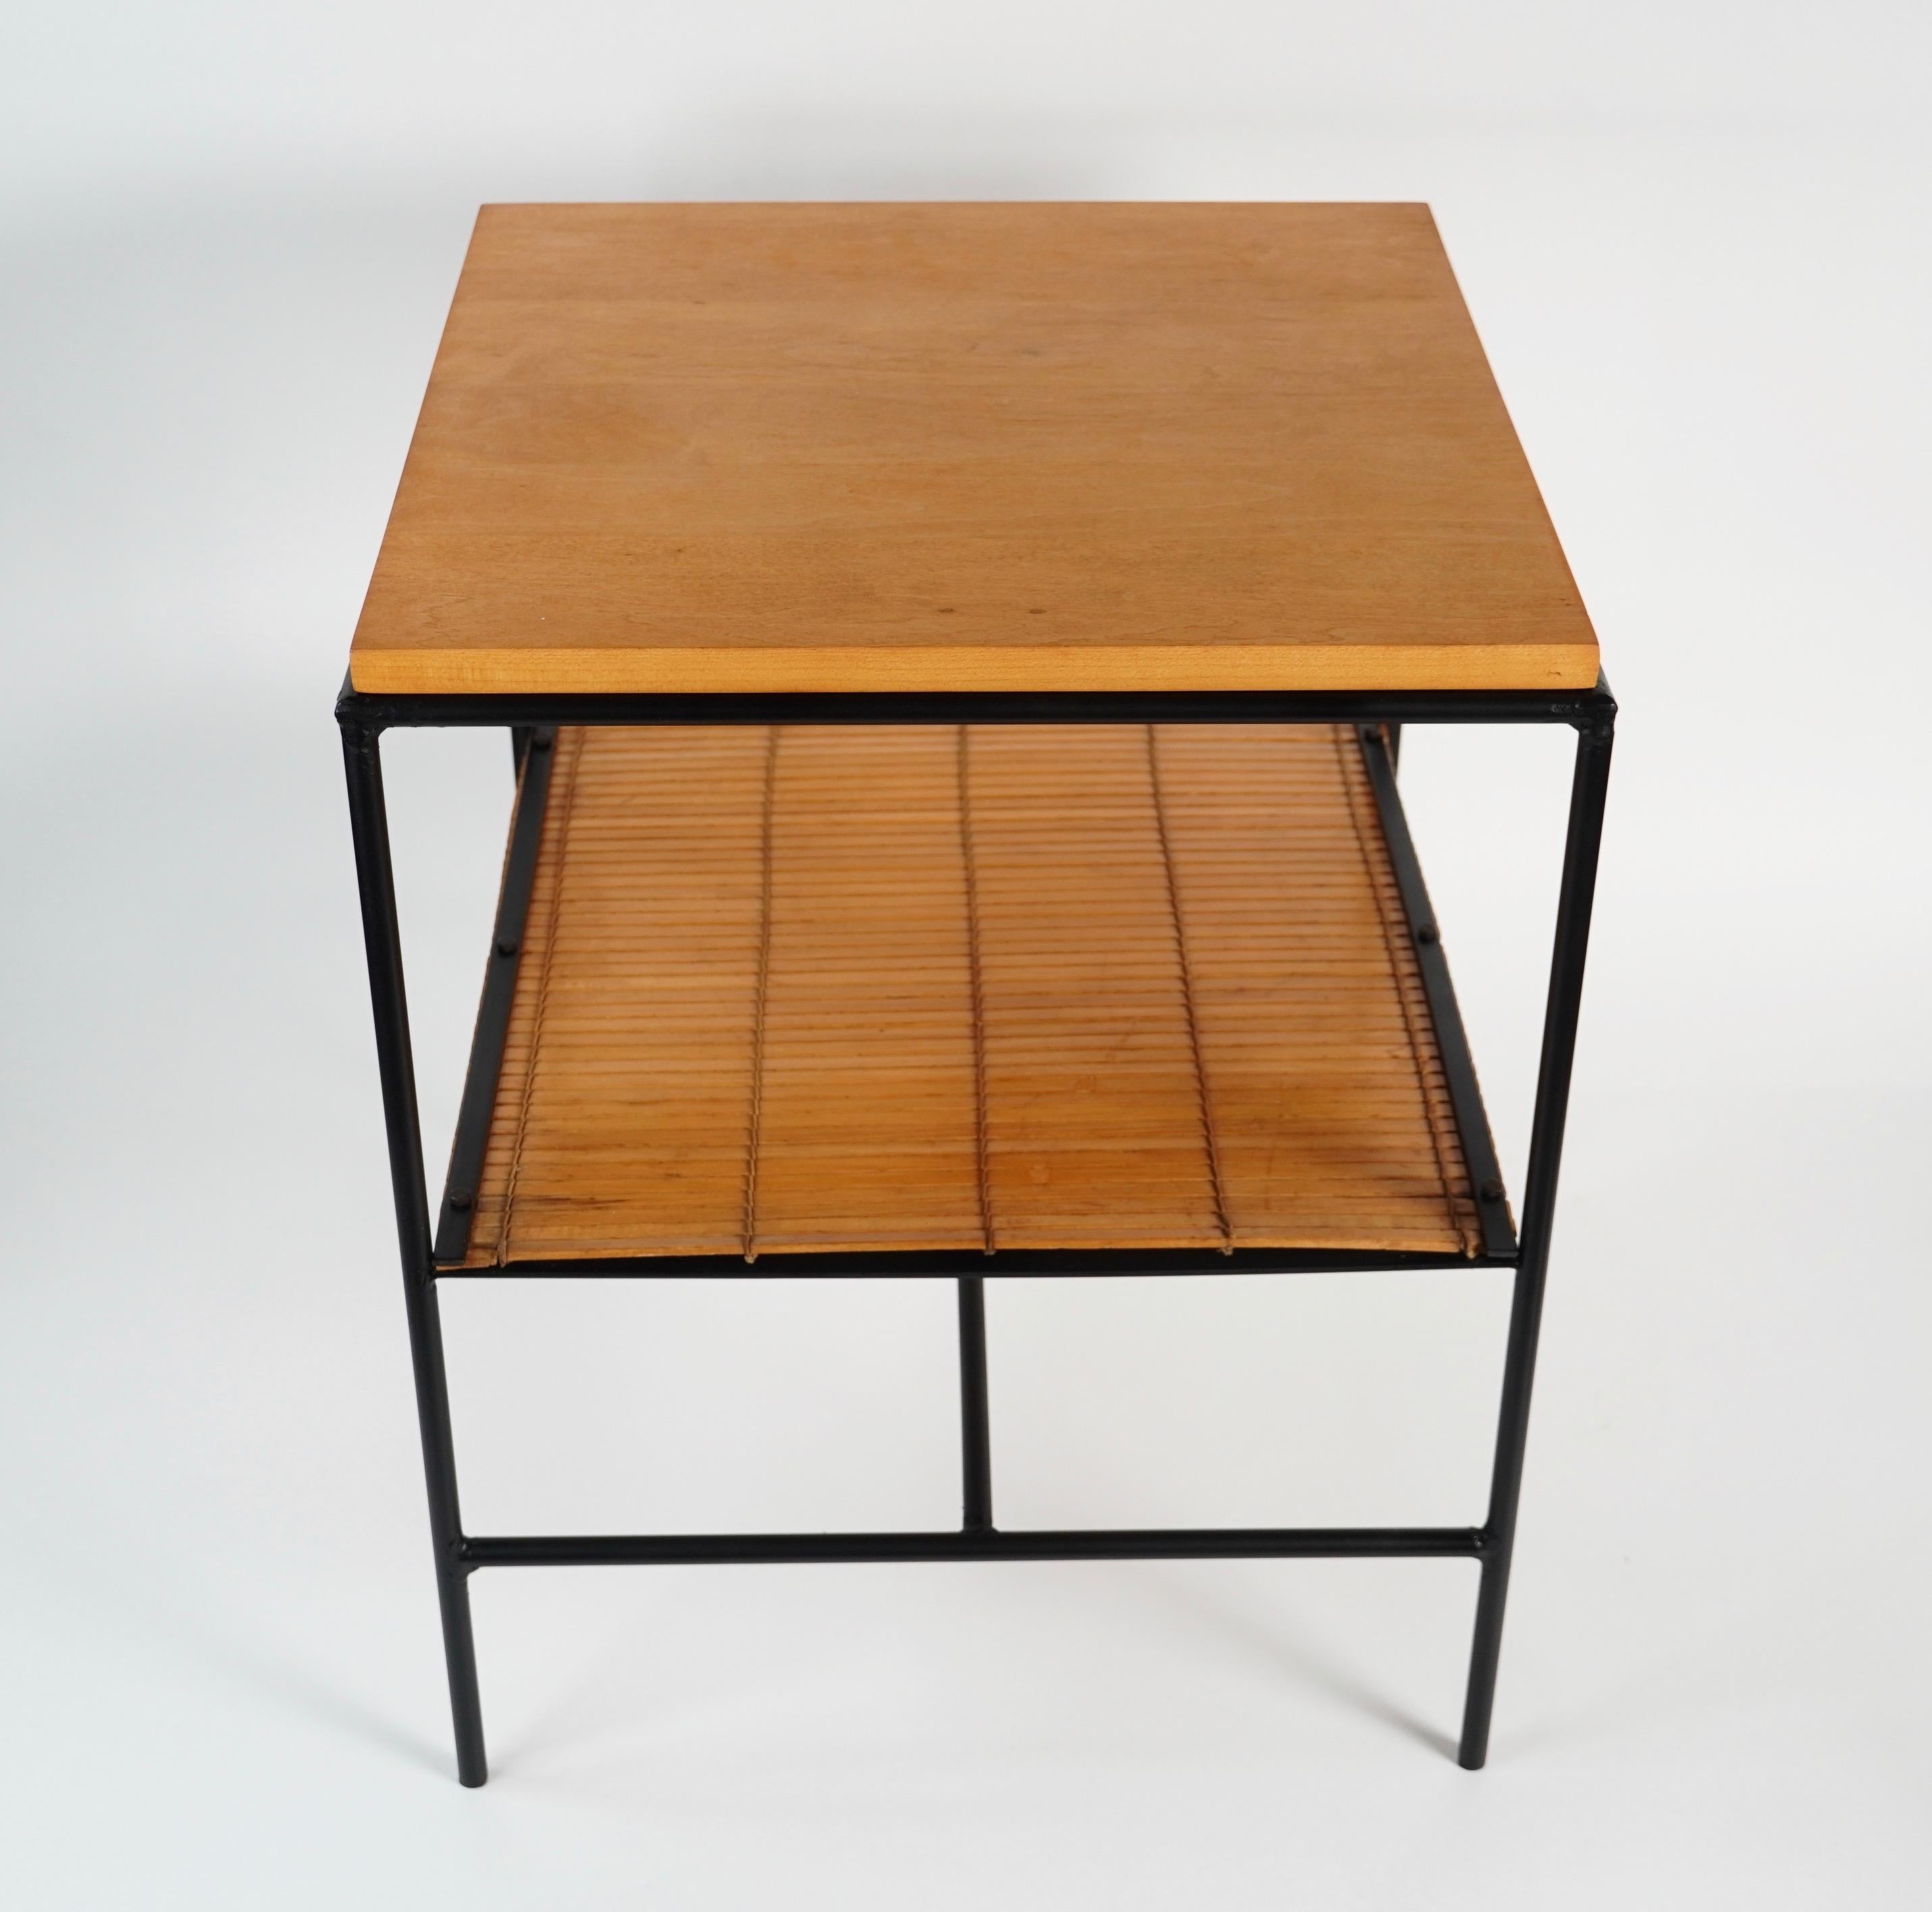 American designer Paul Winthrop McCobb (1917-1969) Planner Group side table with a black iron frame, woven bamboo bottom shelf and a square maple top. The blend of these materials in its construction gives the table a refined understated appearance.